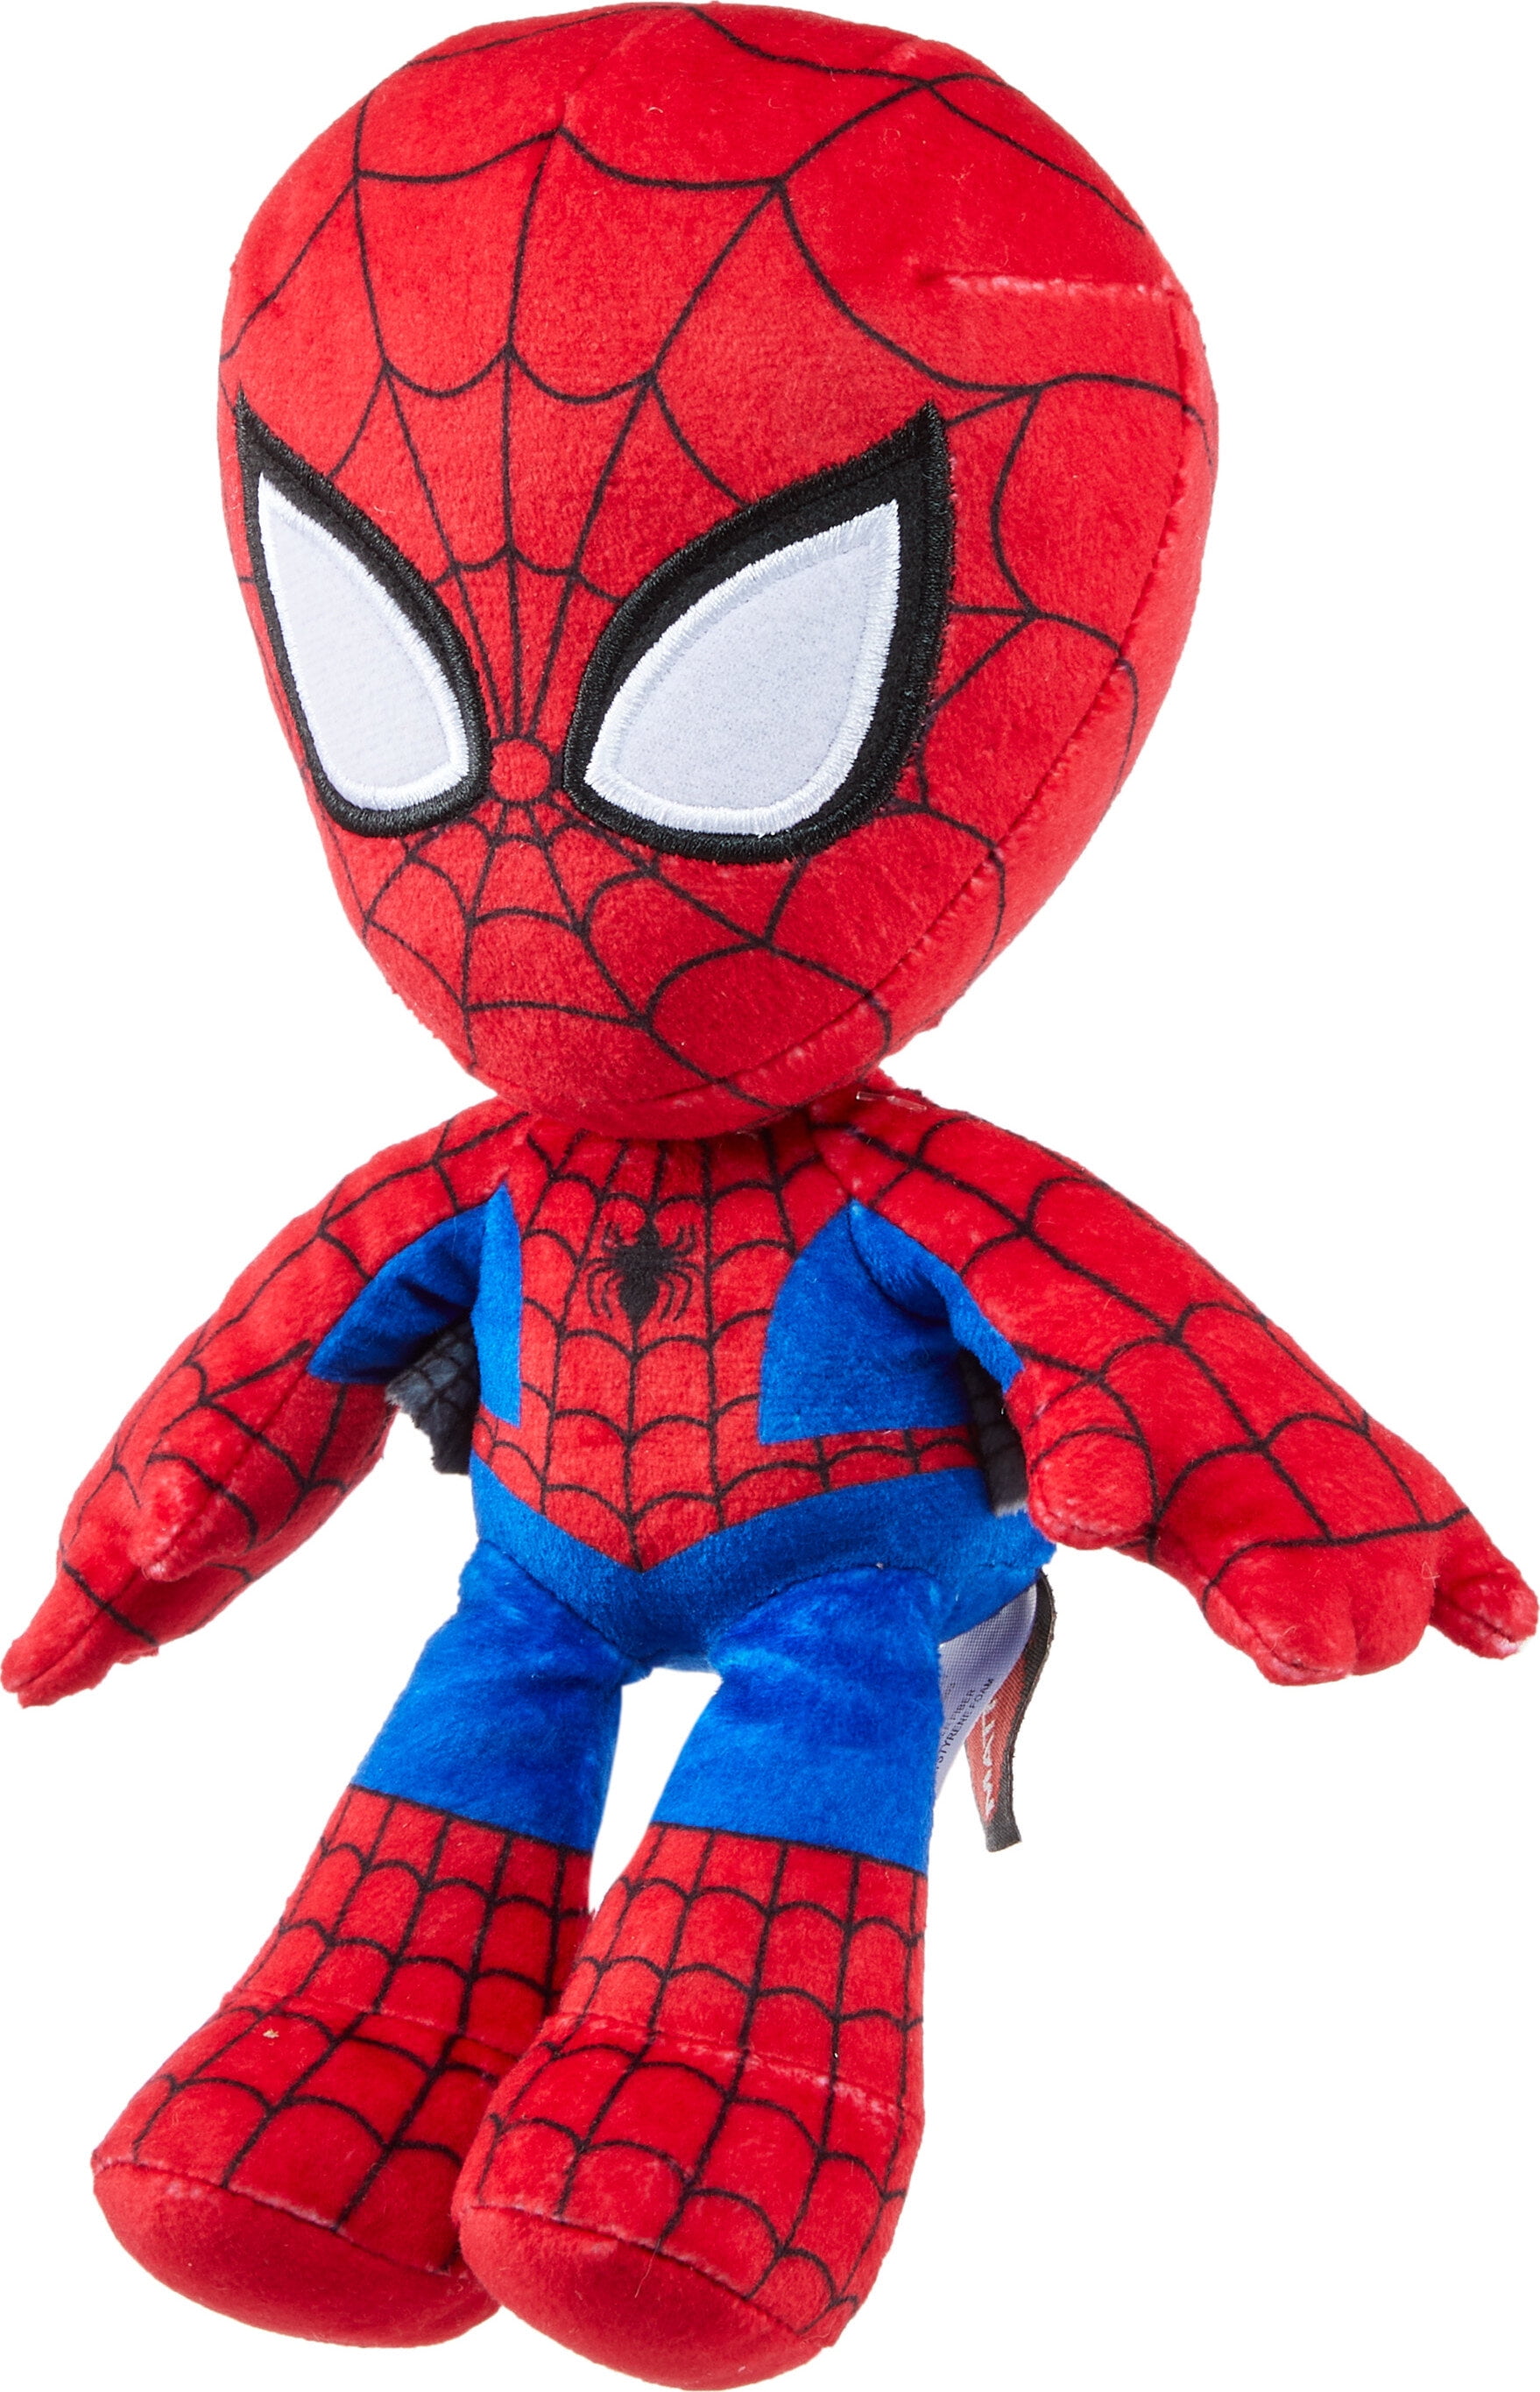  Marvel Ginormous Plush Spider-Man Character, 28-inch Super Hero  Soft Doll with Role-Play Hands, Collectible Gift for Kids & Fans Ages 3  Years Old & Up : Toys & Games